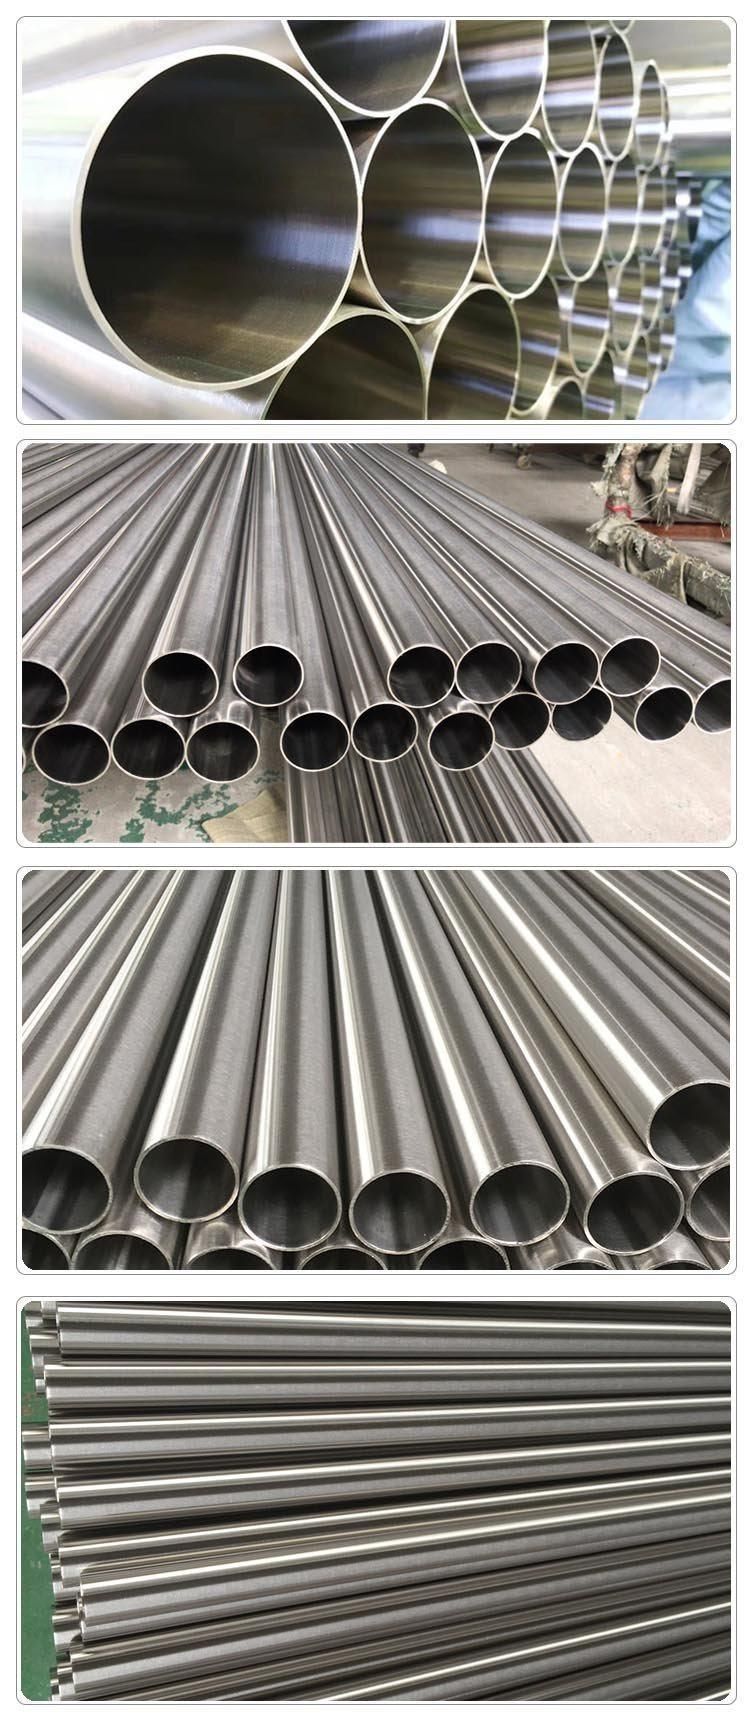 Stainless Steel Seamless Precision Pipe Industrial Round Sanitary Ss Welded Tube Price